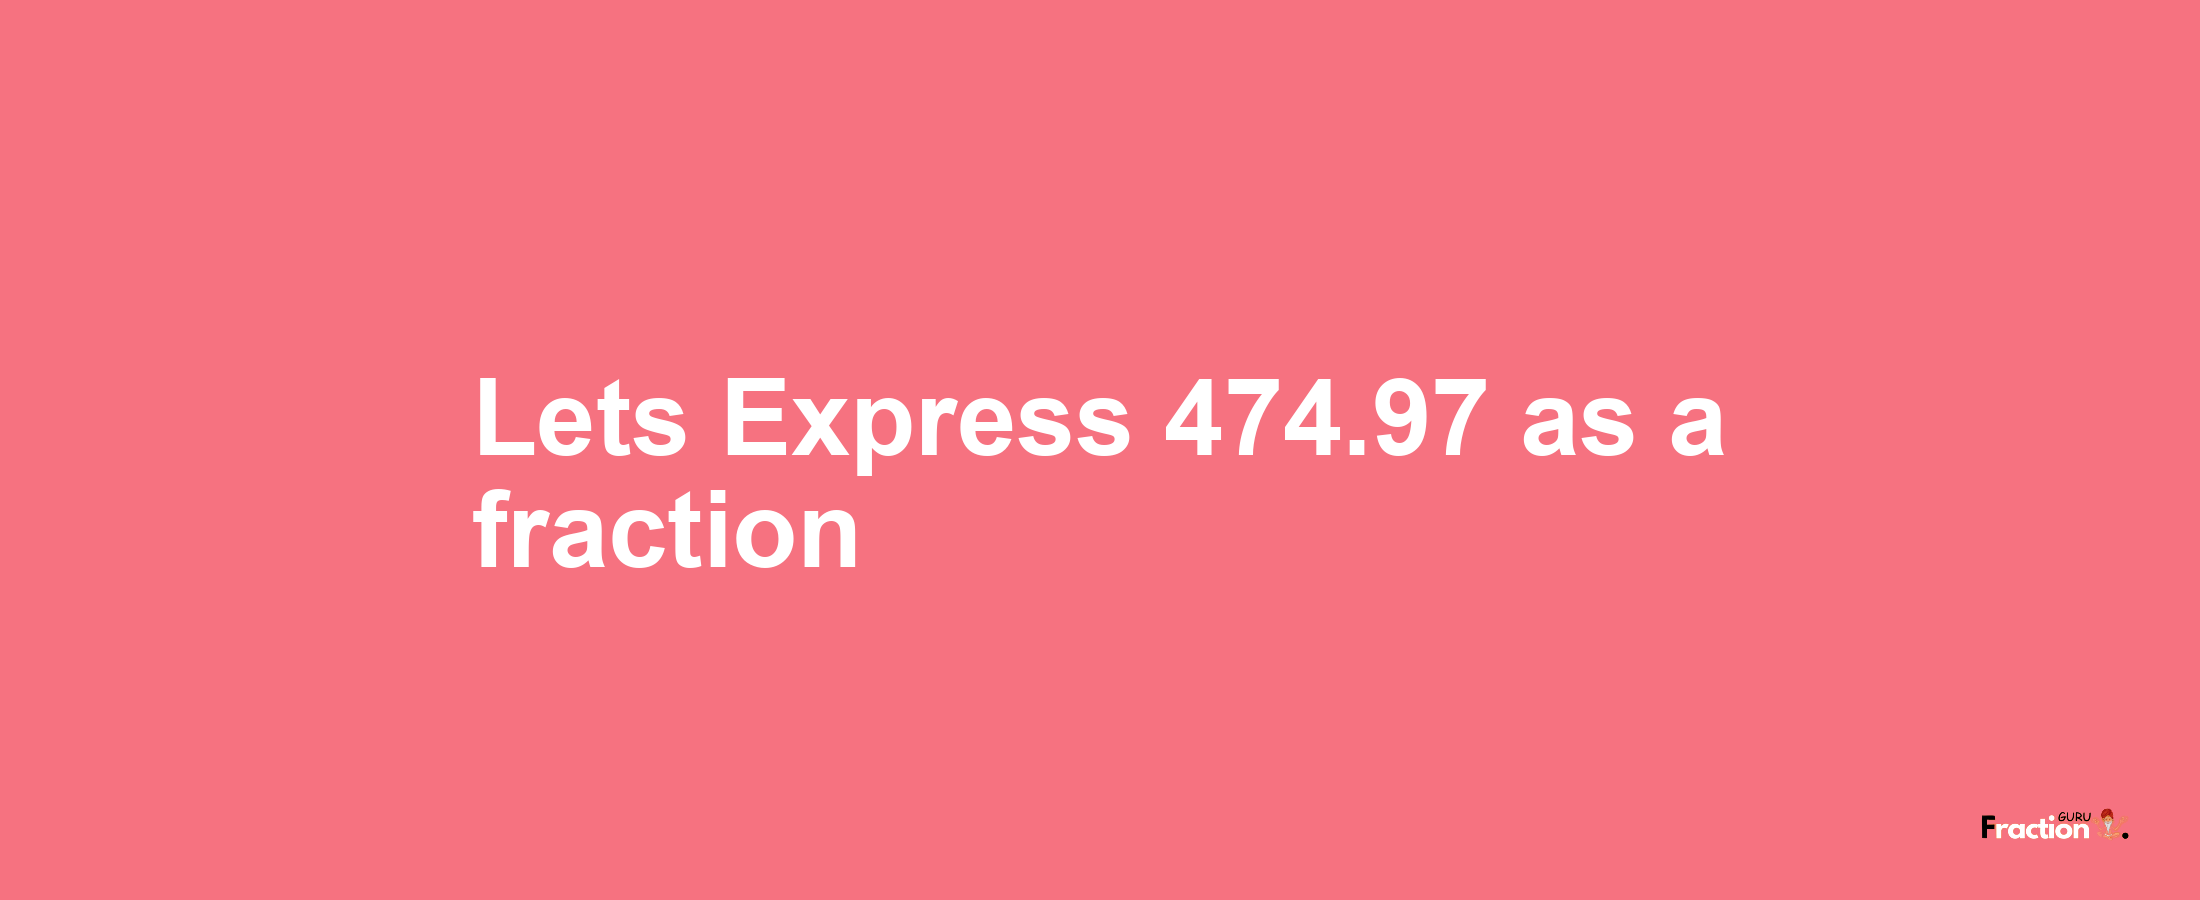 Lets Express 474.97 as afraction